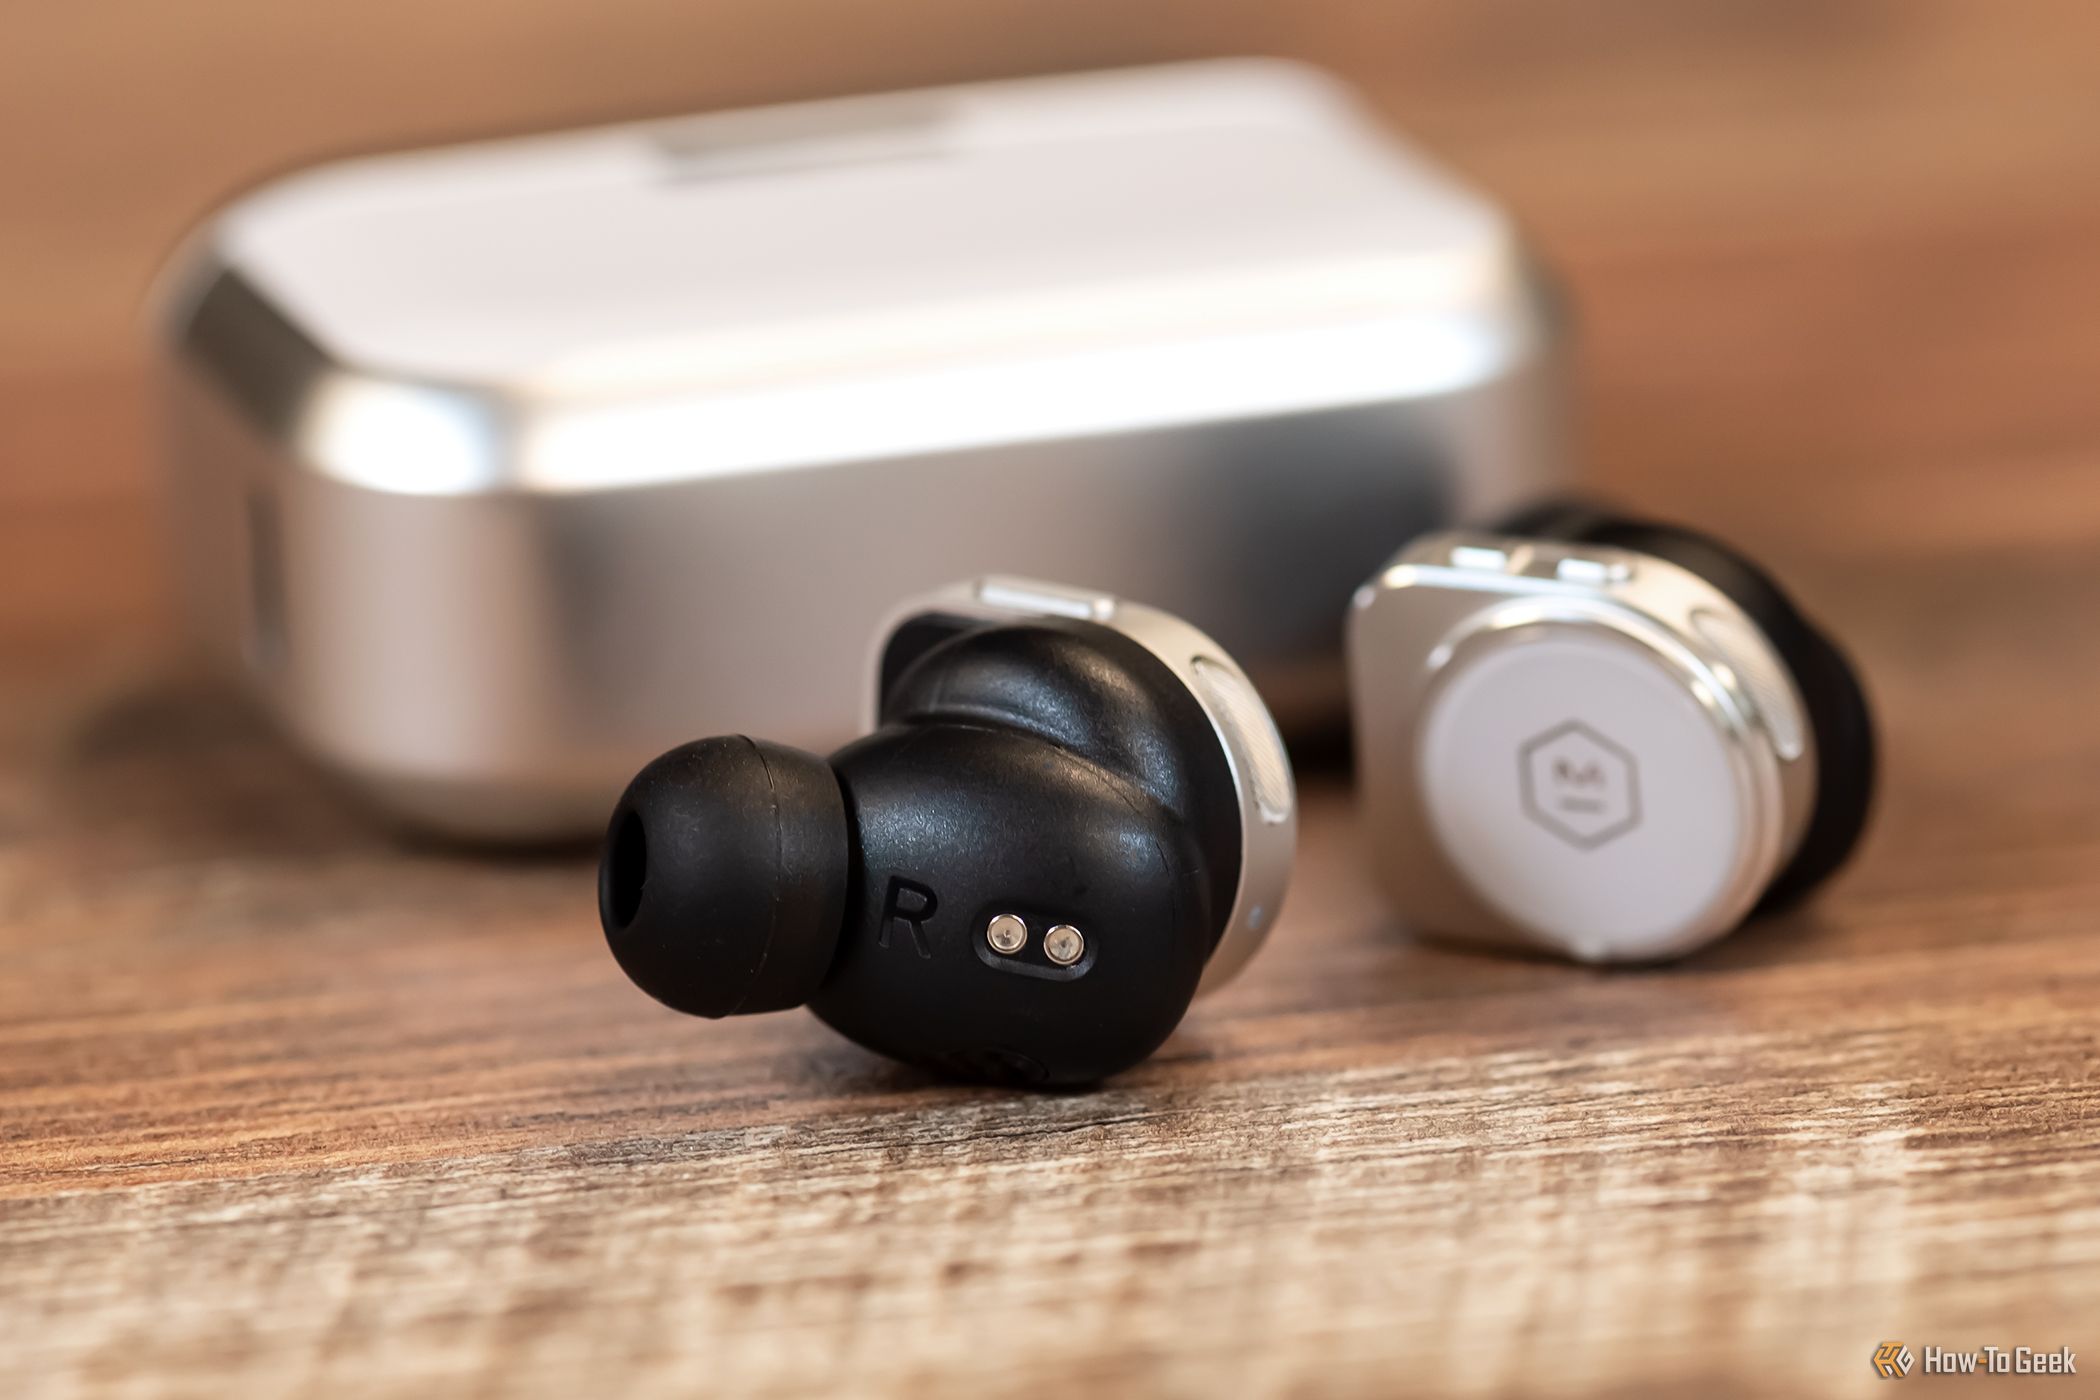 master & dynamic mw09 earbuds in front of the case